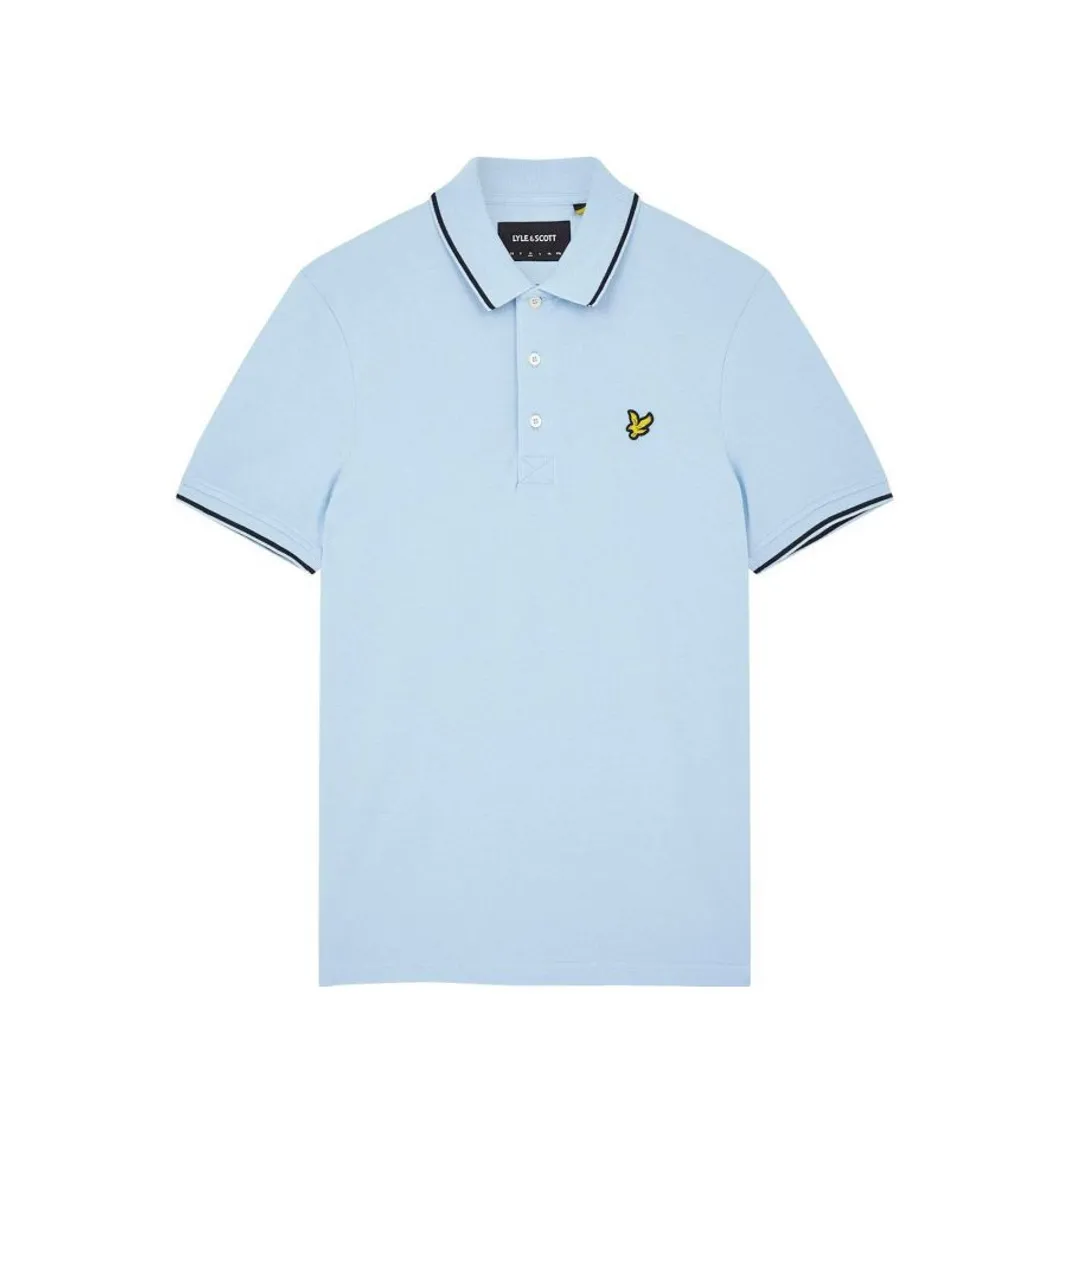 Lyle & Scott Mens Tipped Polo Shirt in Blue Cotton